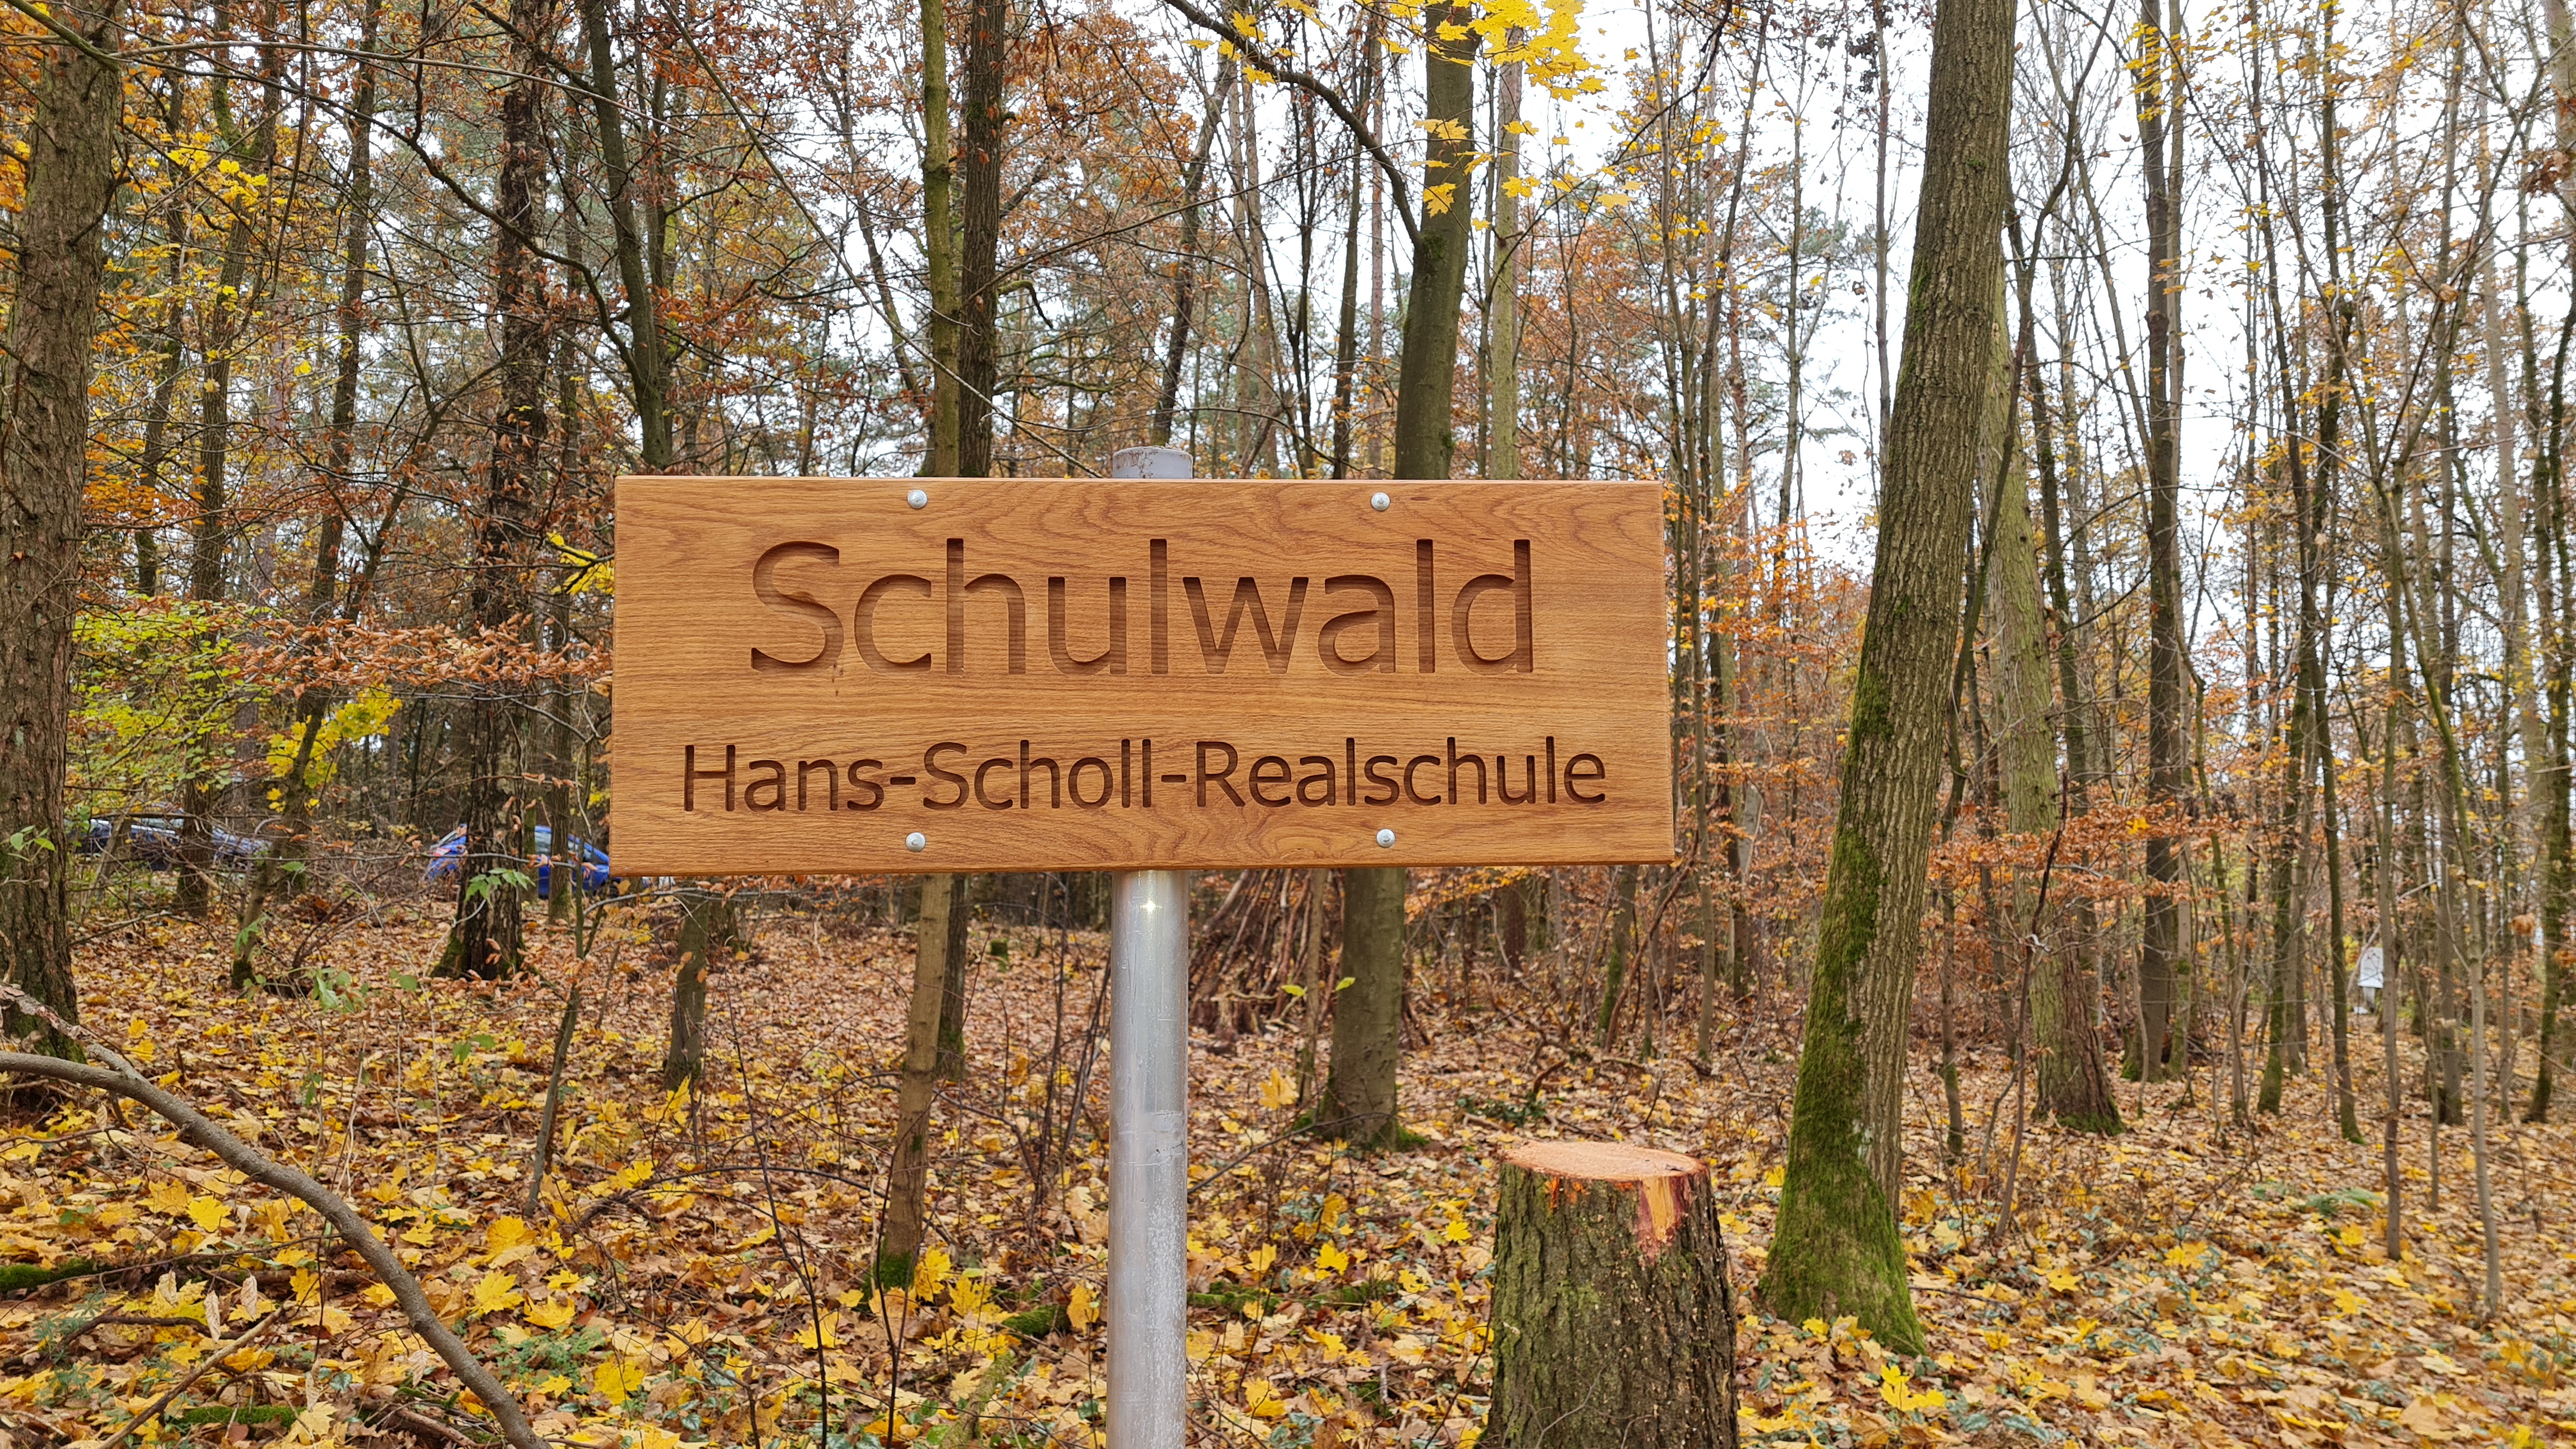 Schulwald 1